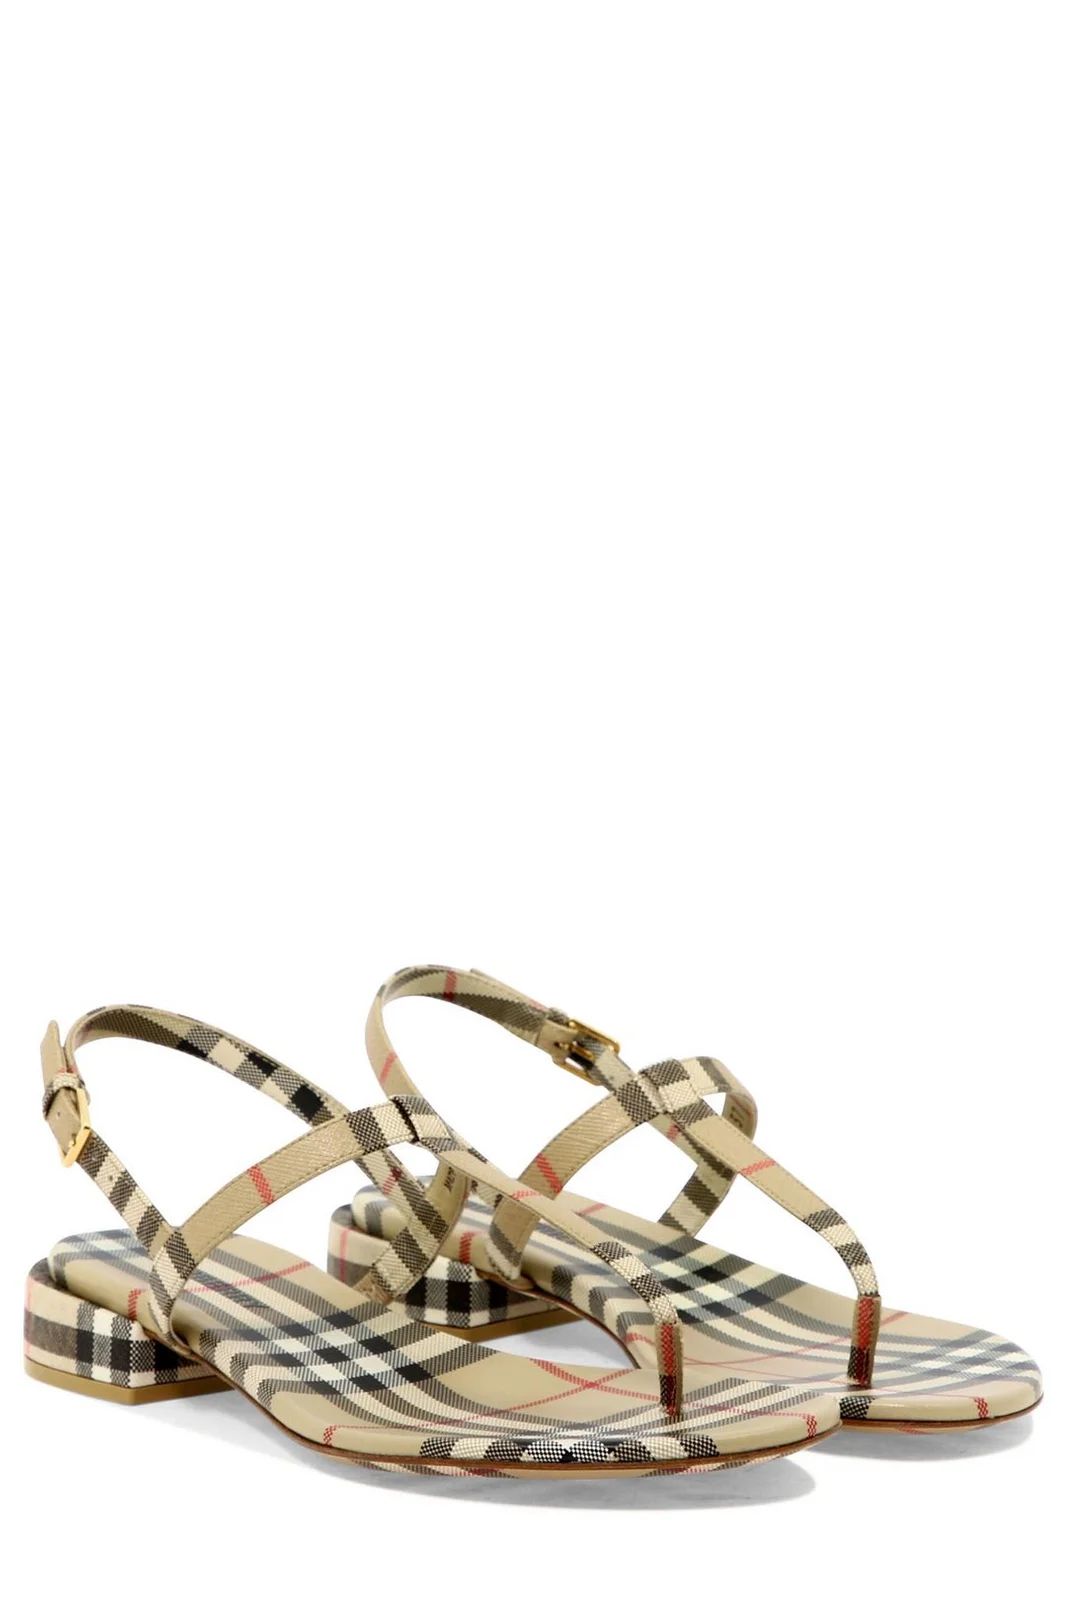 Burberry Vintage Check Flat Sandals | Cettire Global